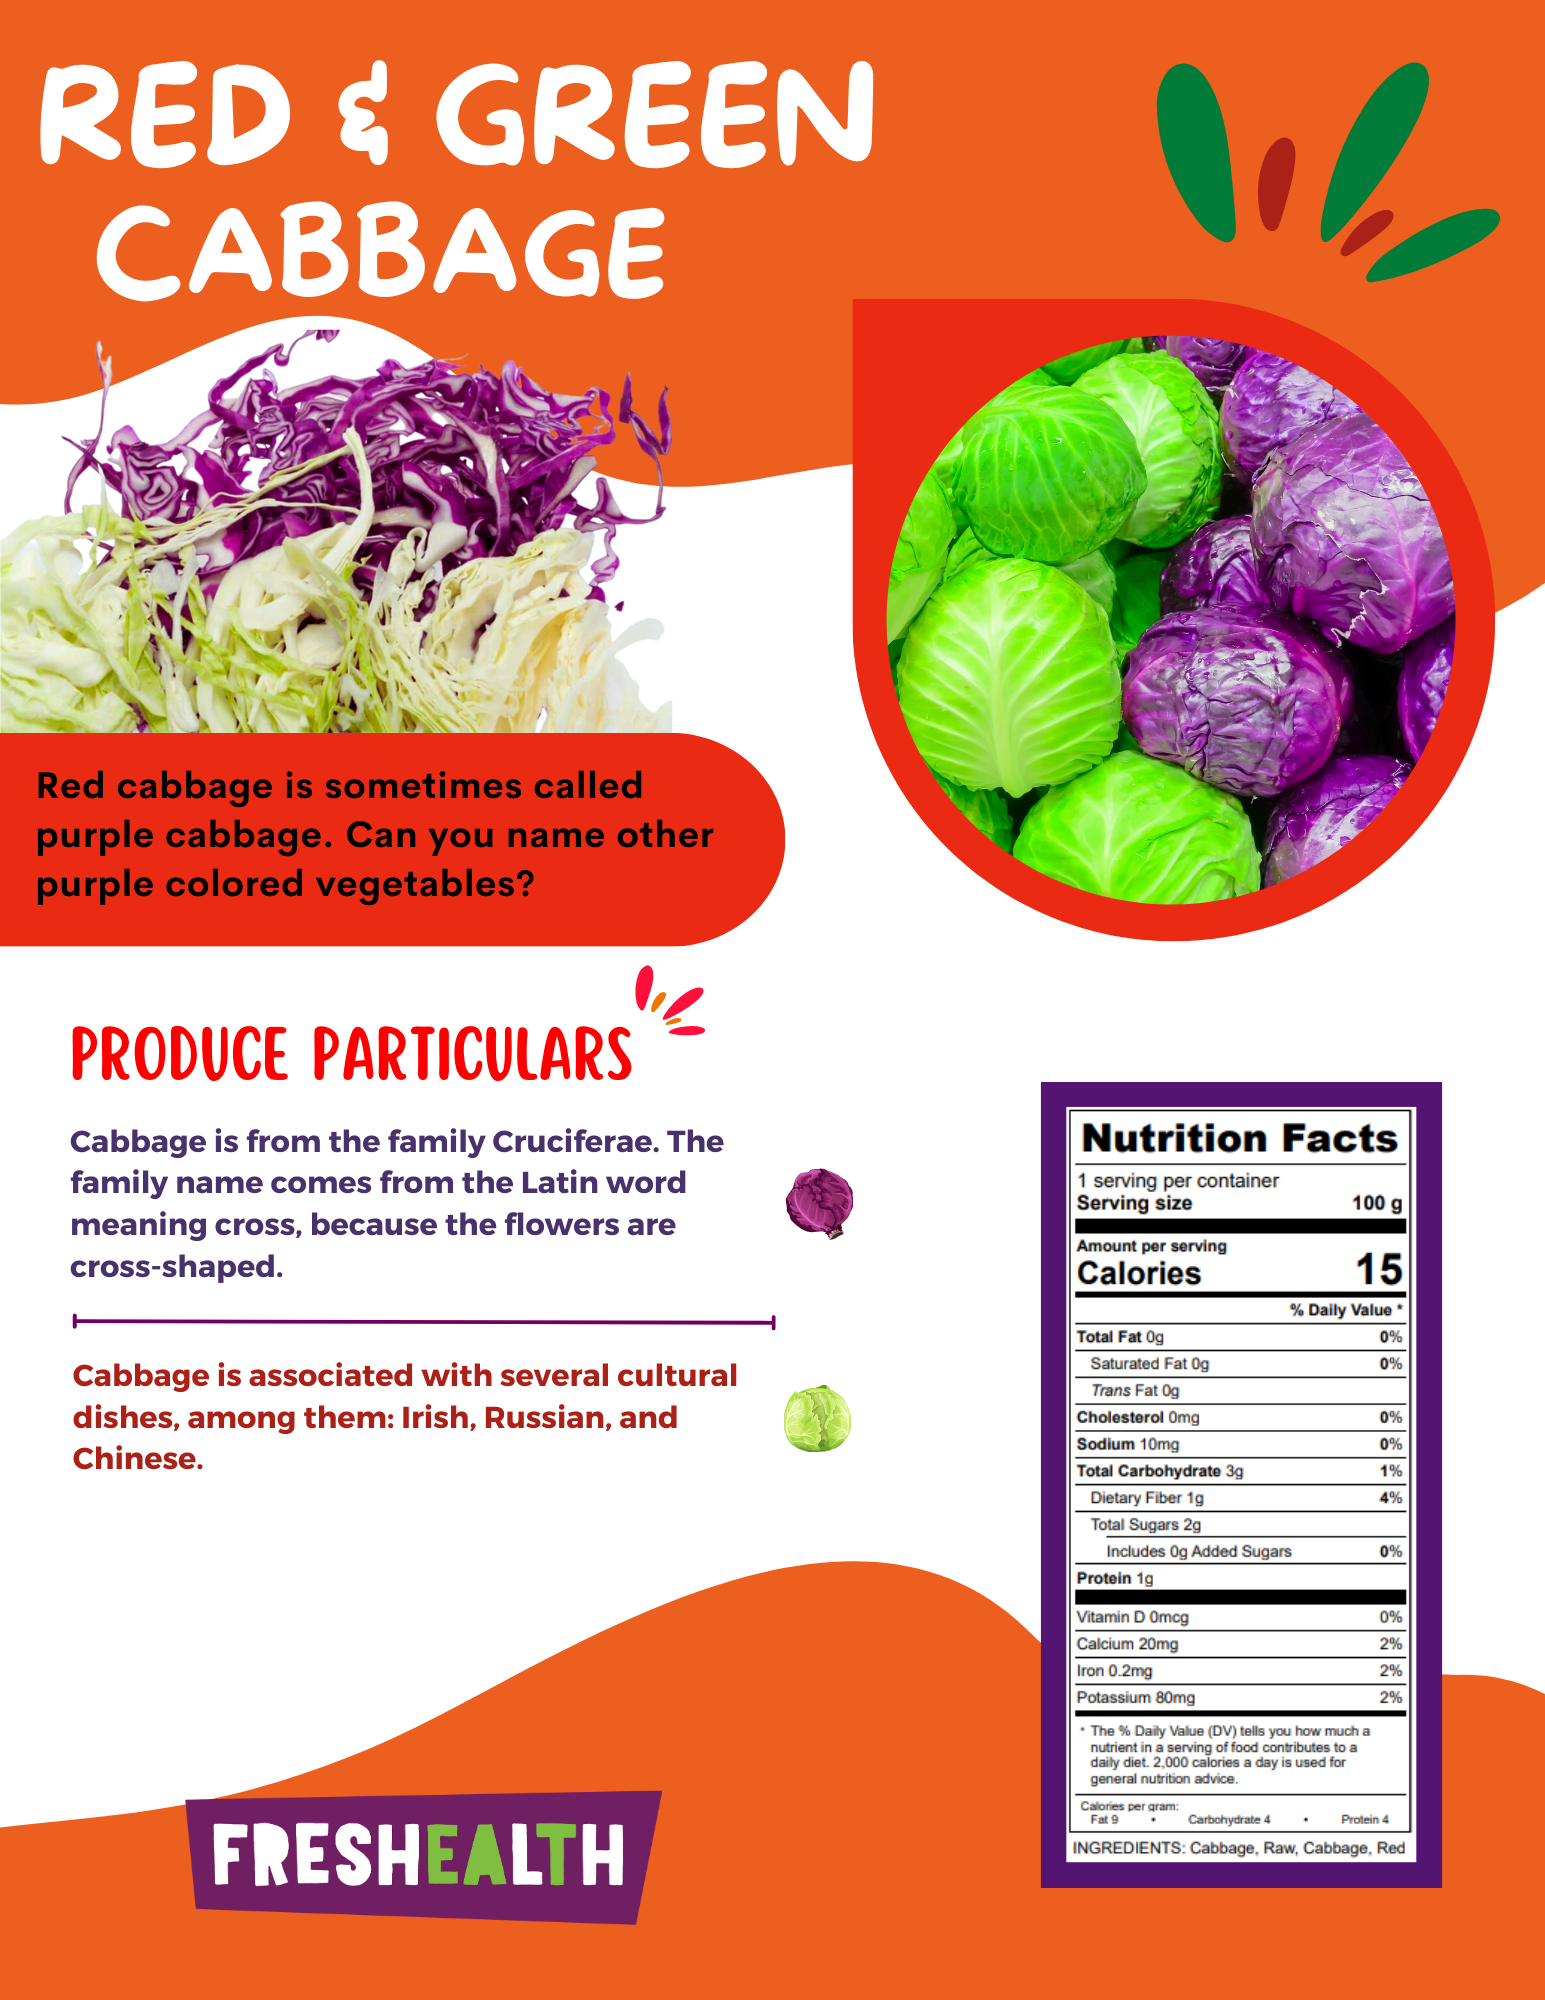 red & green cabbage.png